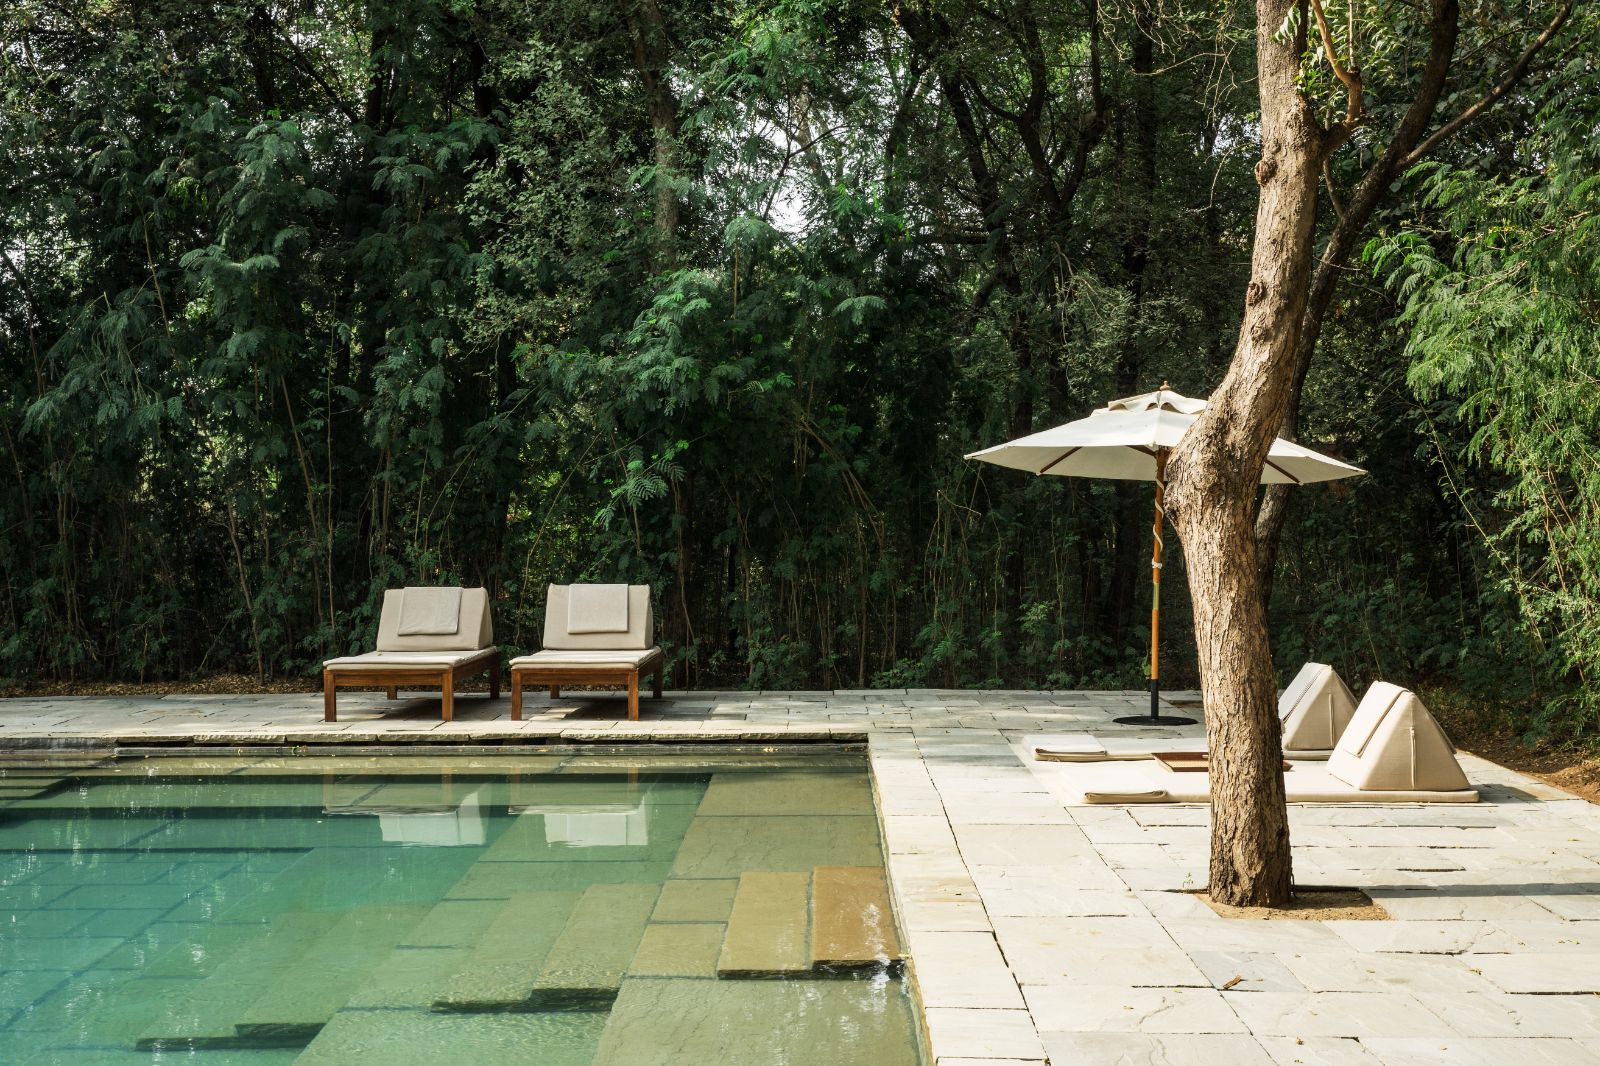 Poolside sunbeds at Aman-I-Khas by Ranthambore National Park in India